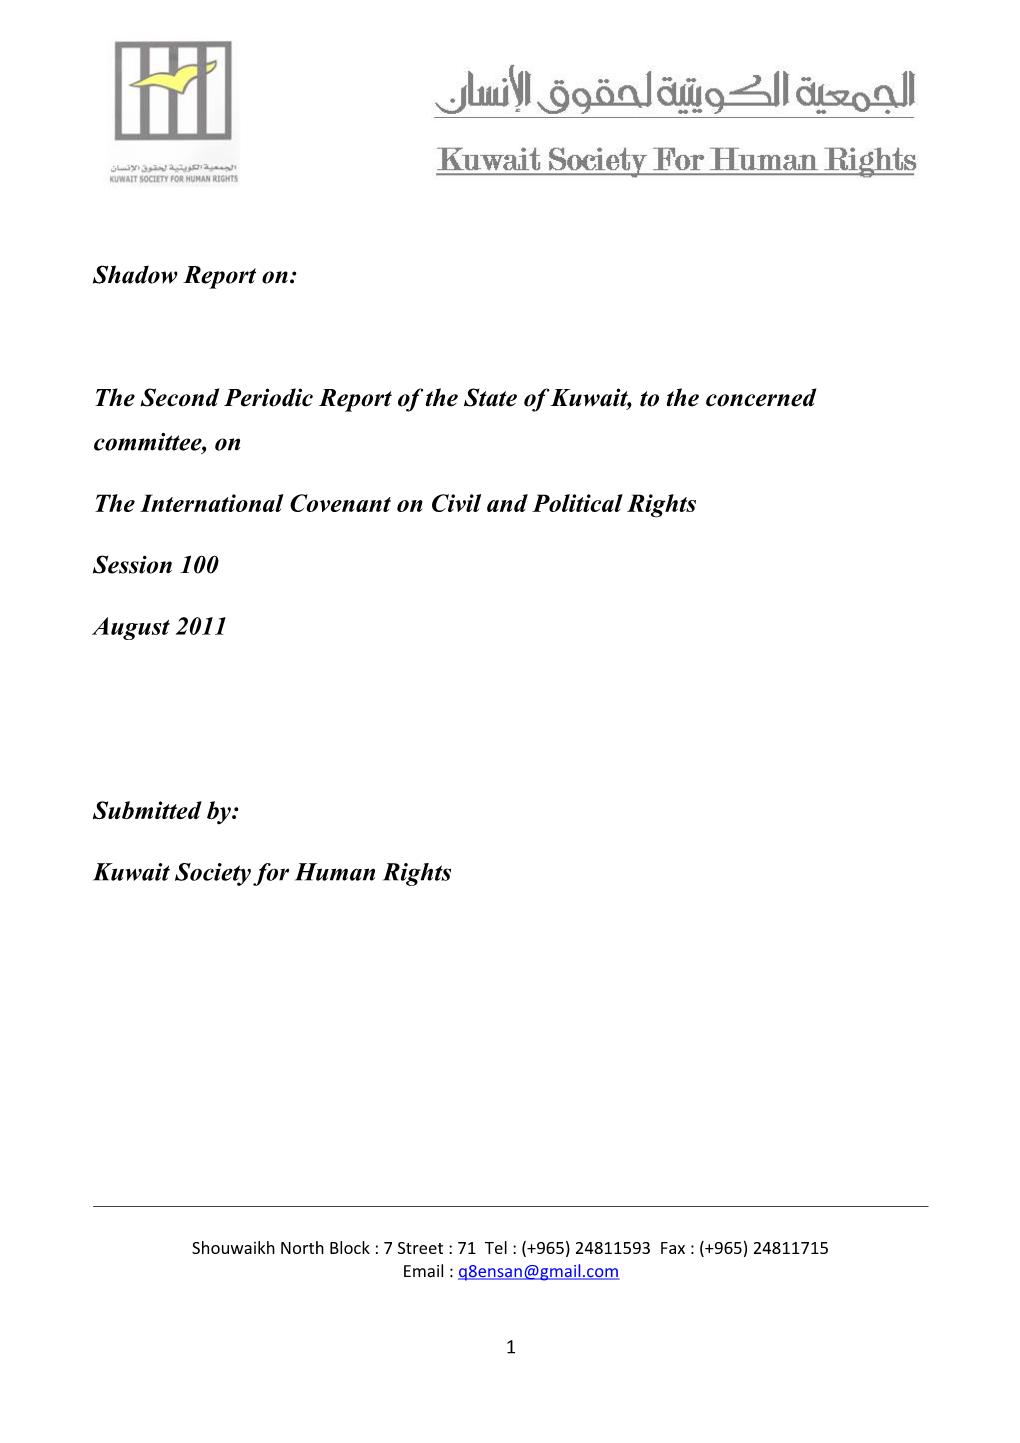 The Second Periodic Report of the State of Kuwait, to the Concerned Committee, On